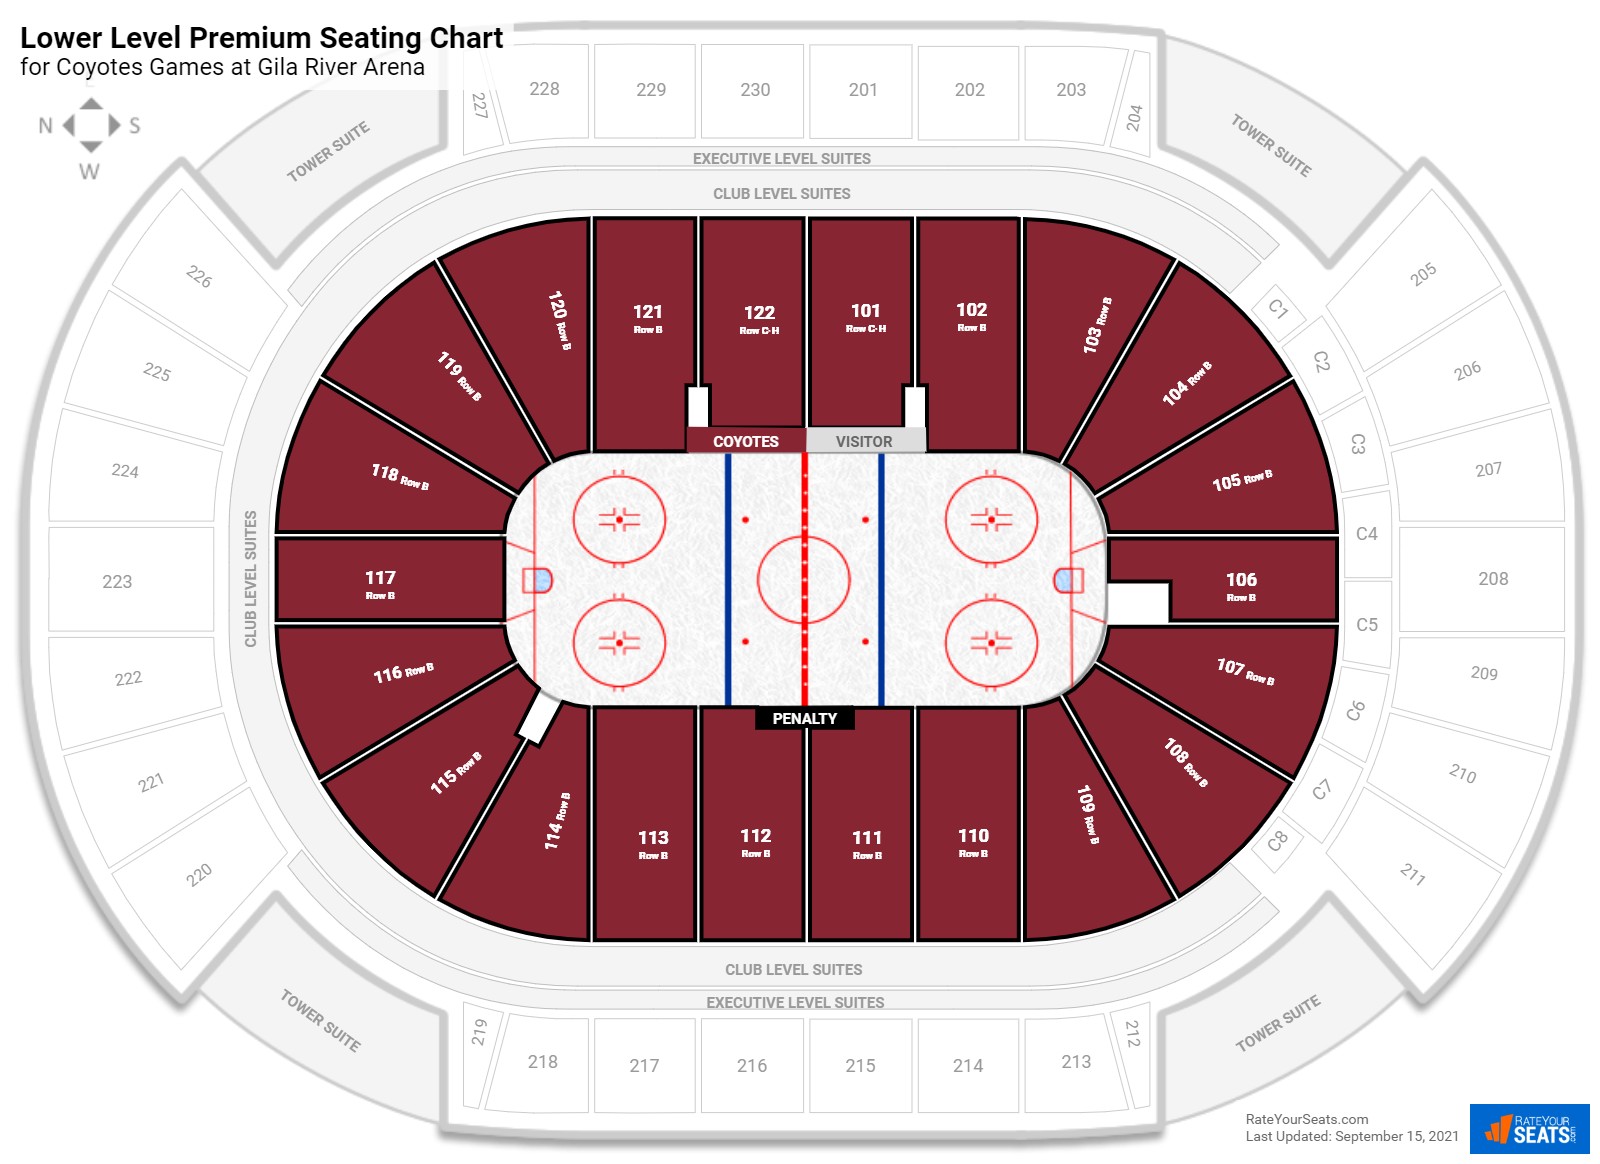 Coyotes Lower Level Premium Seating Chart at Gila River Arena